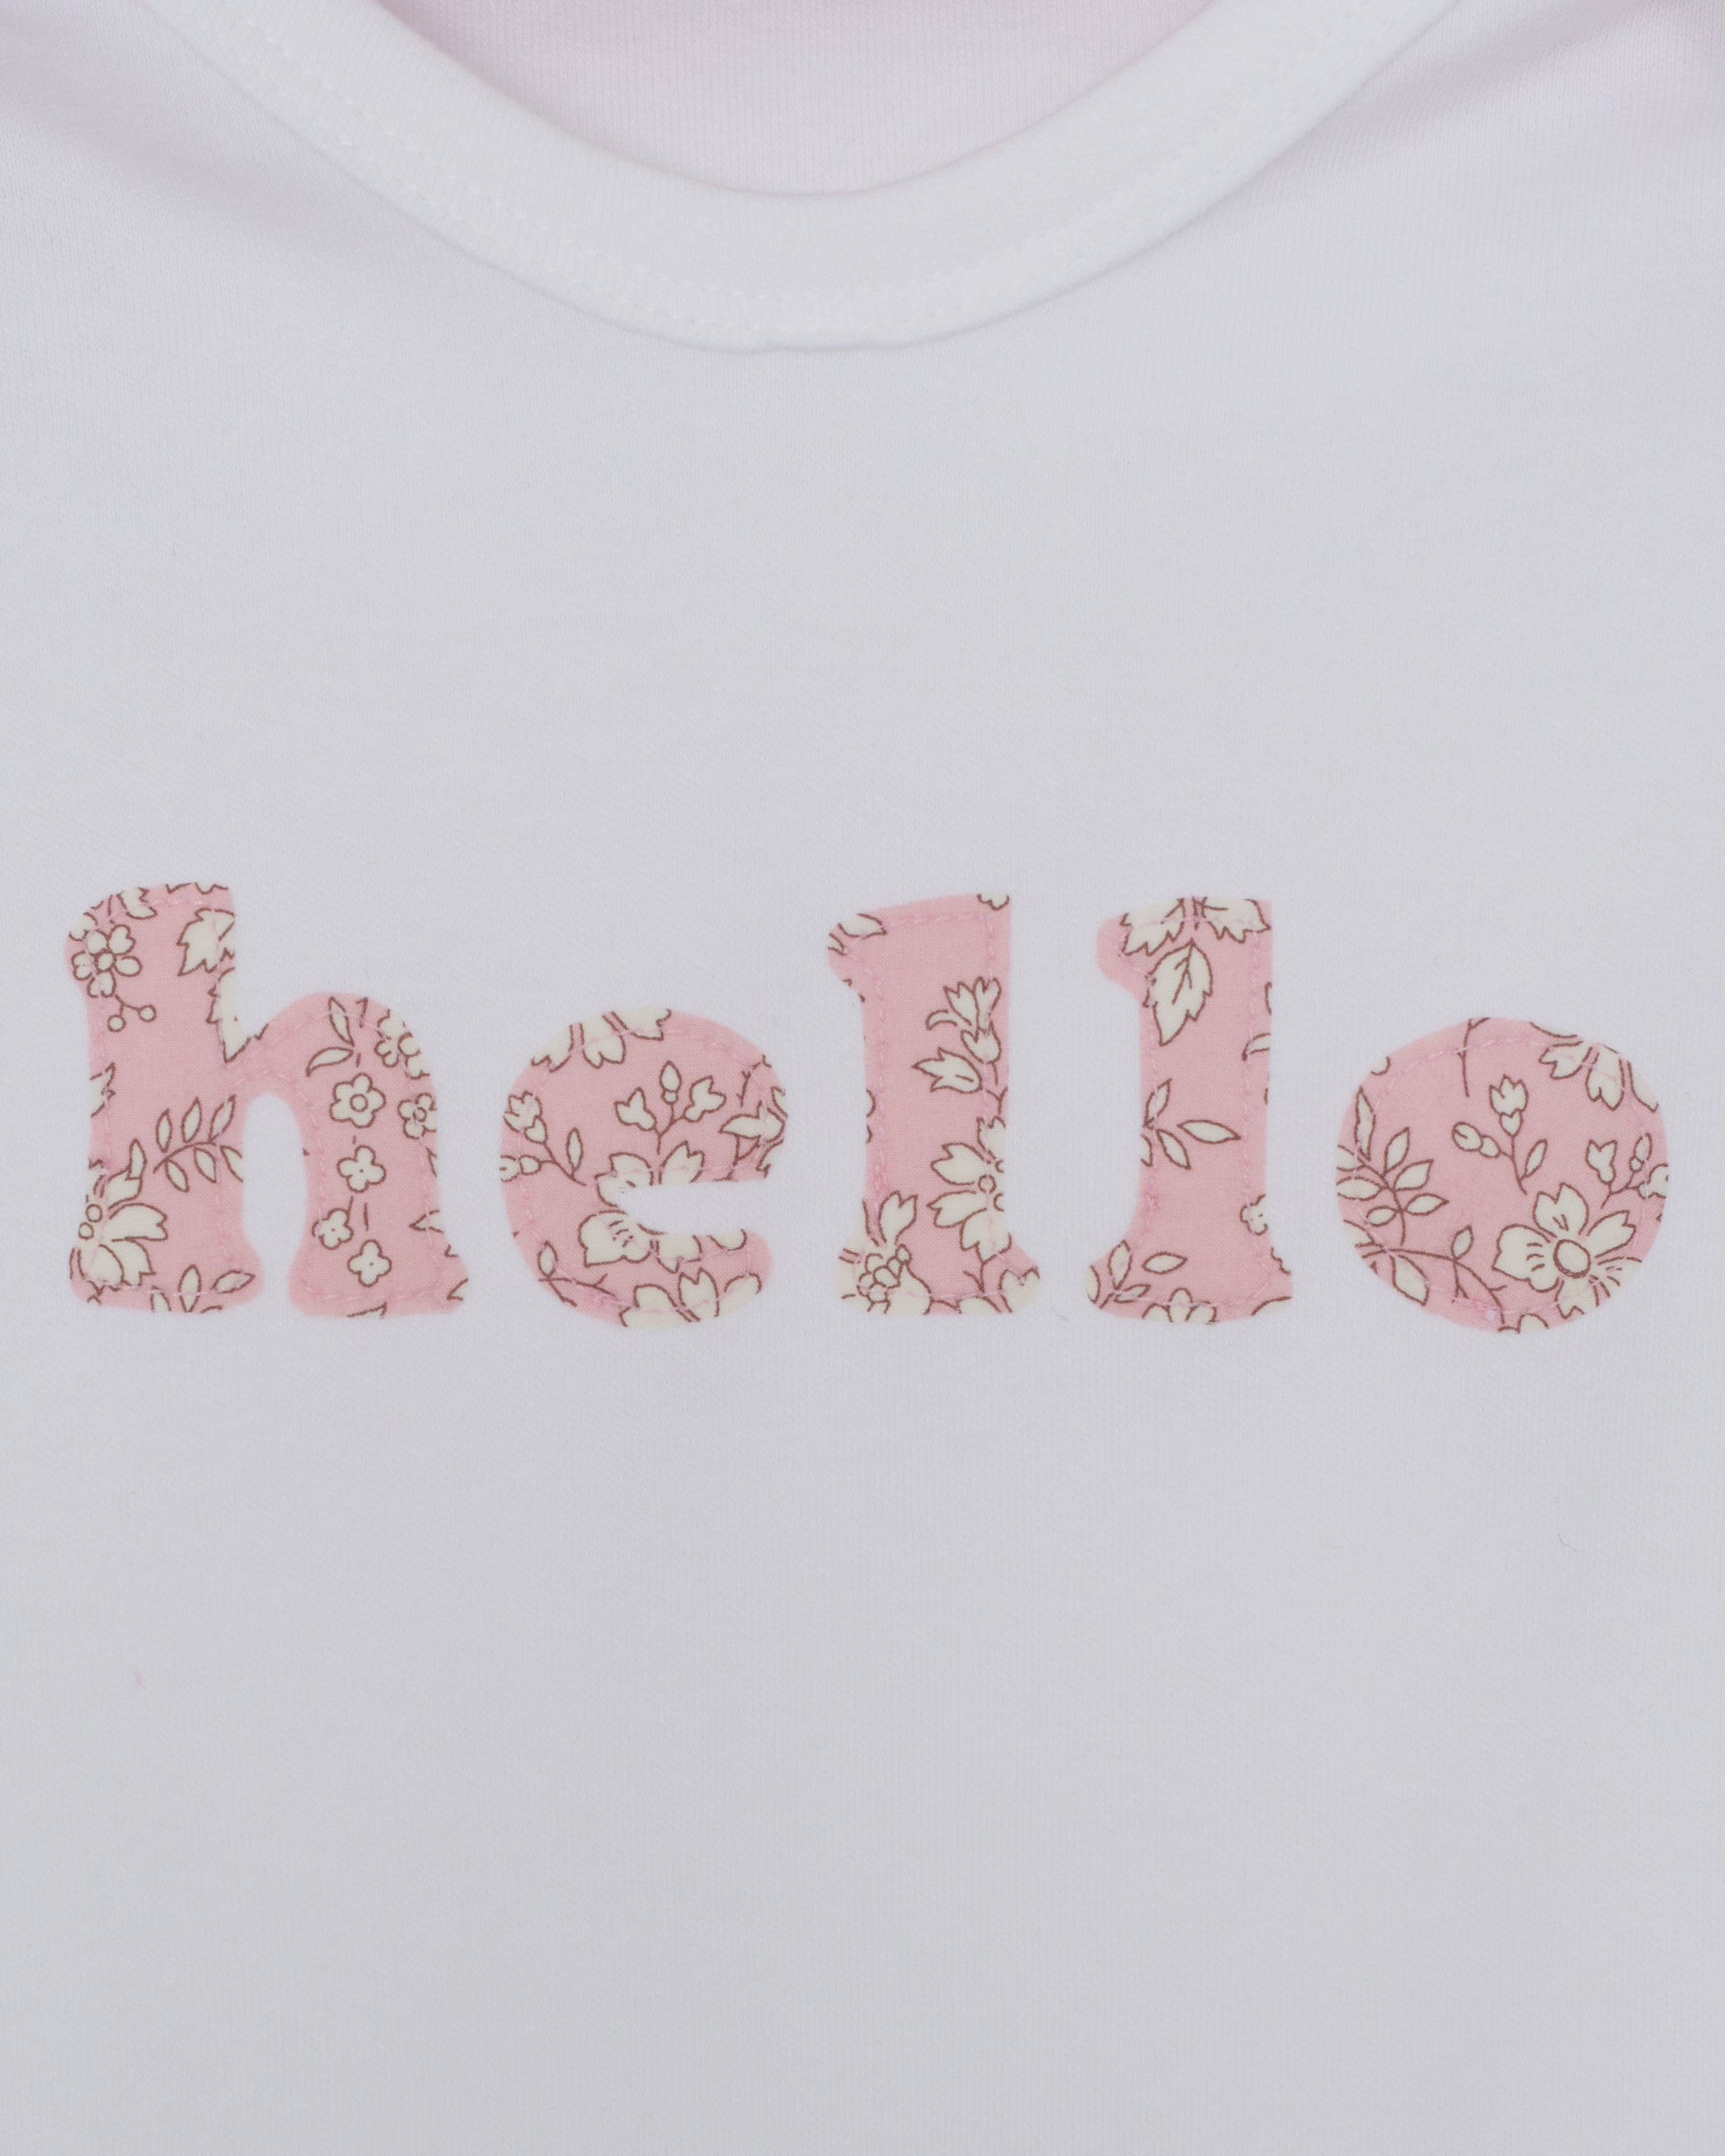 Magnificent Stanley Romper 'hello' Cotton Romper in Choice of Liberty print